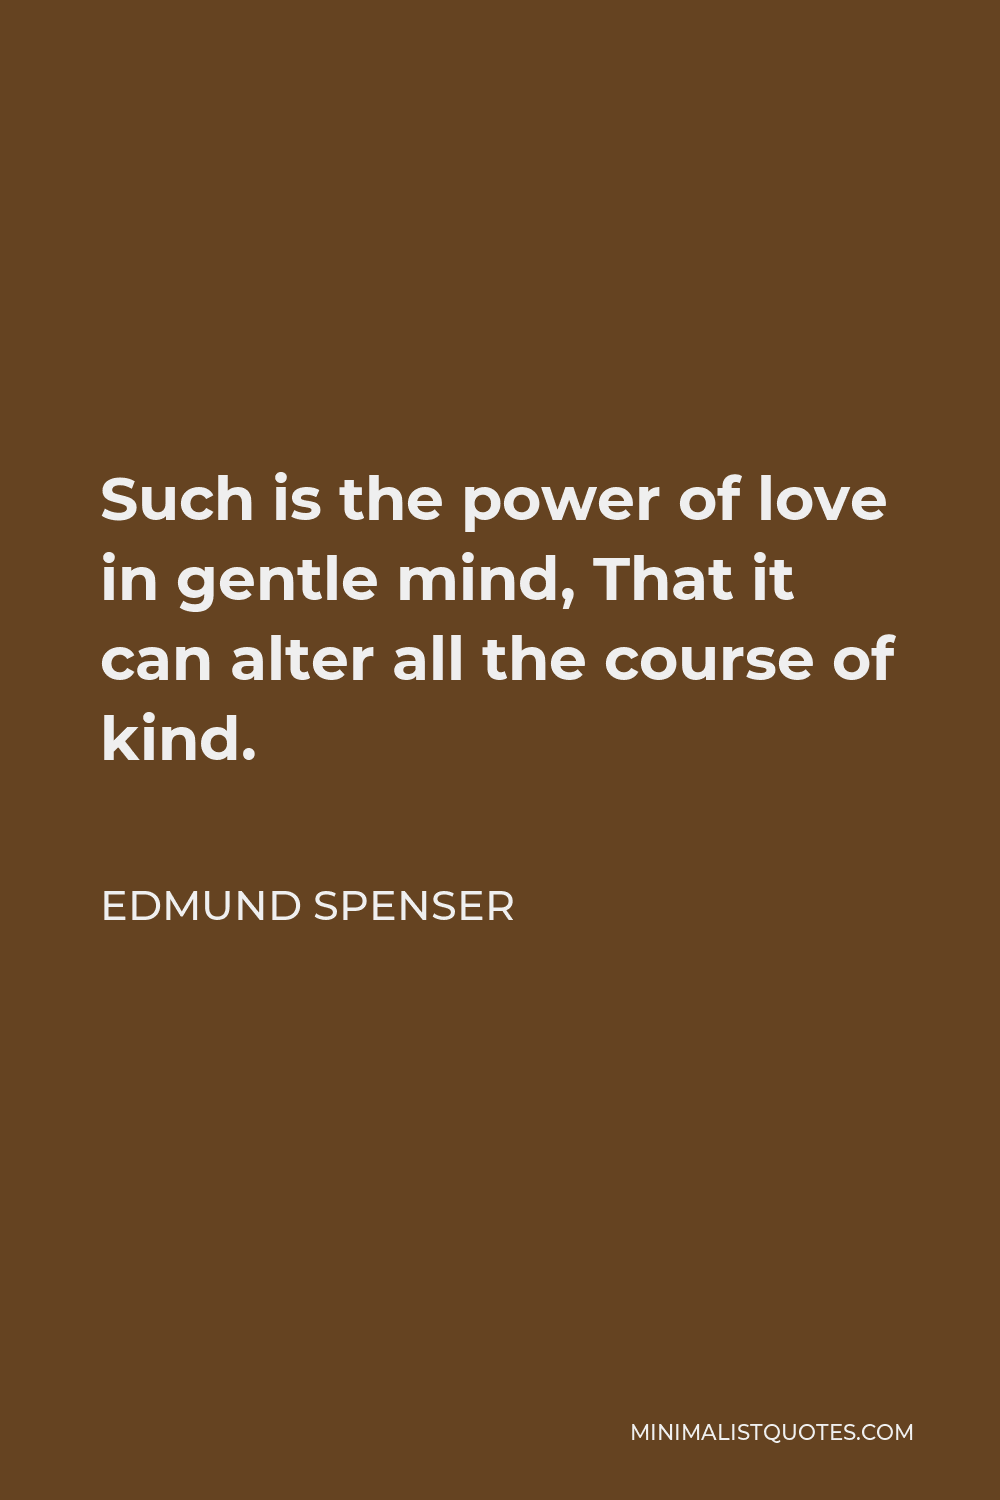 Edmund Spenser Quote - Such is the power of love in gentle mind, That it can alter all the course of kind.